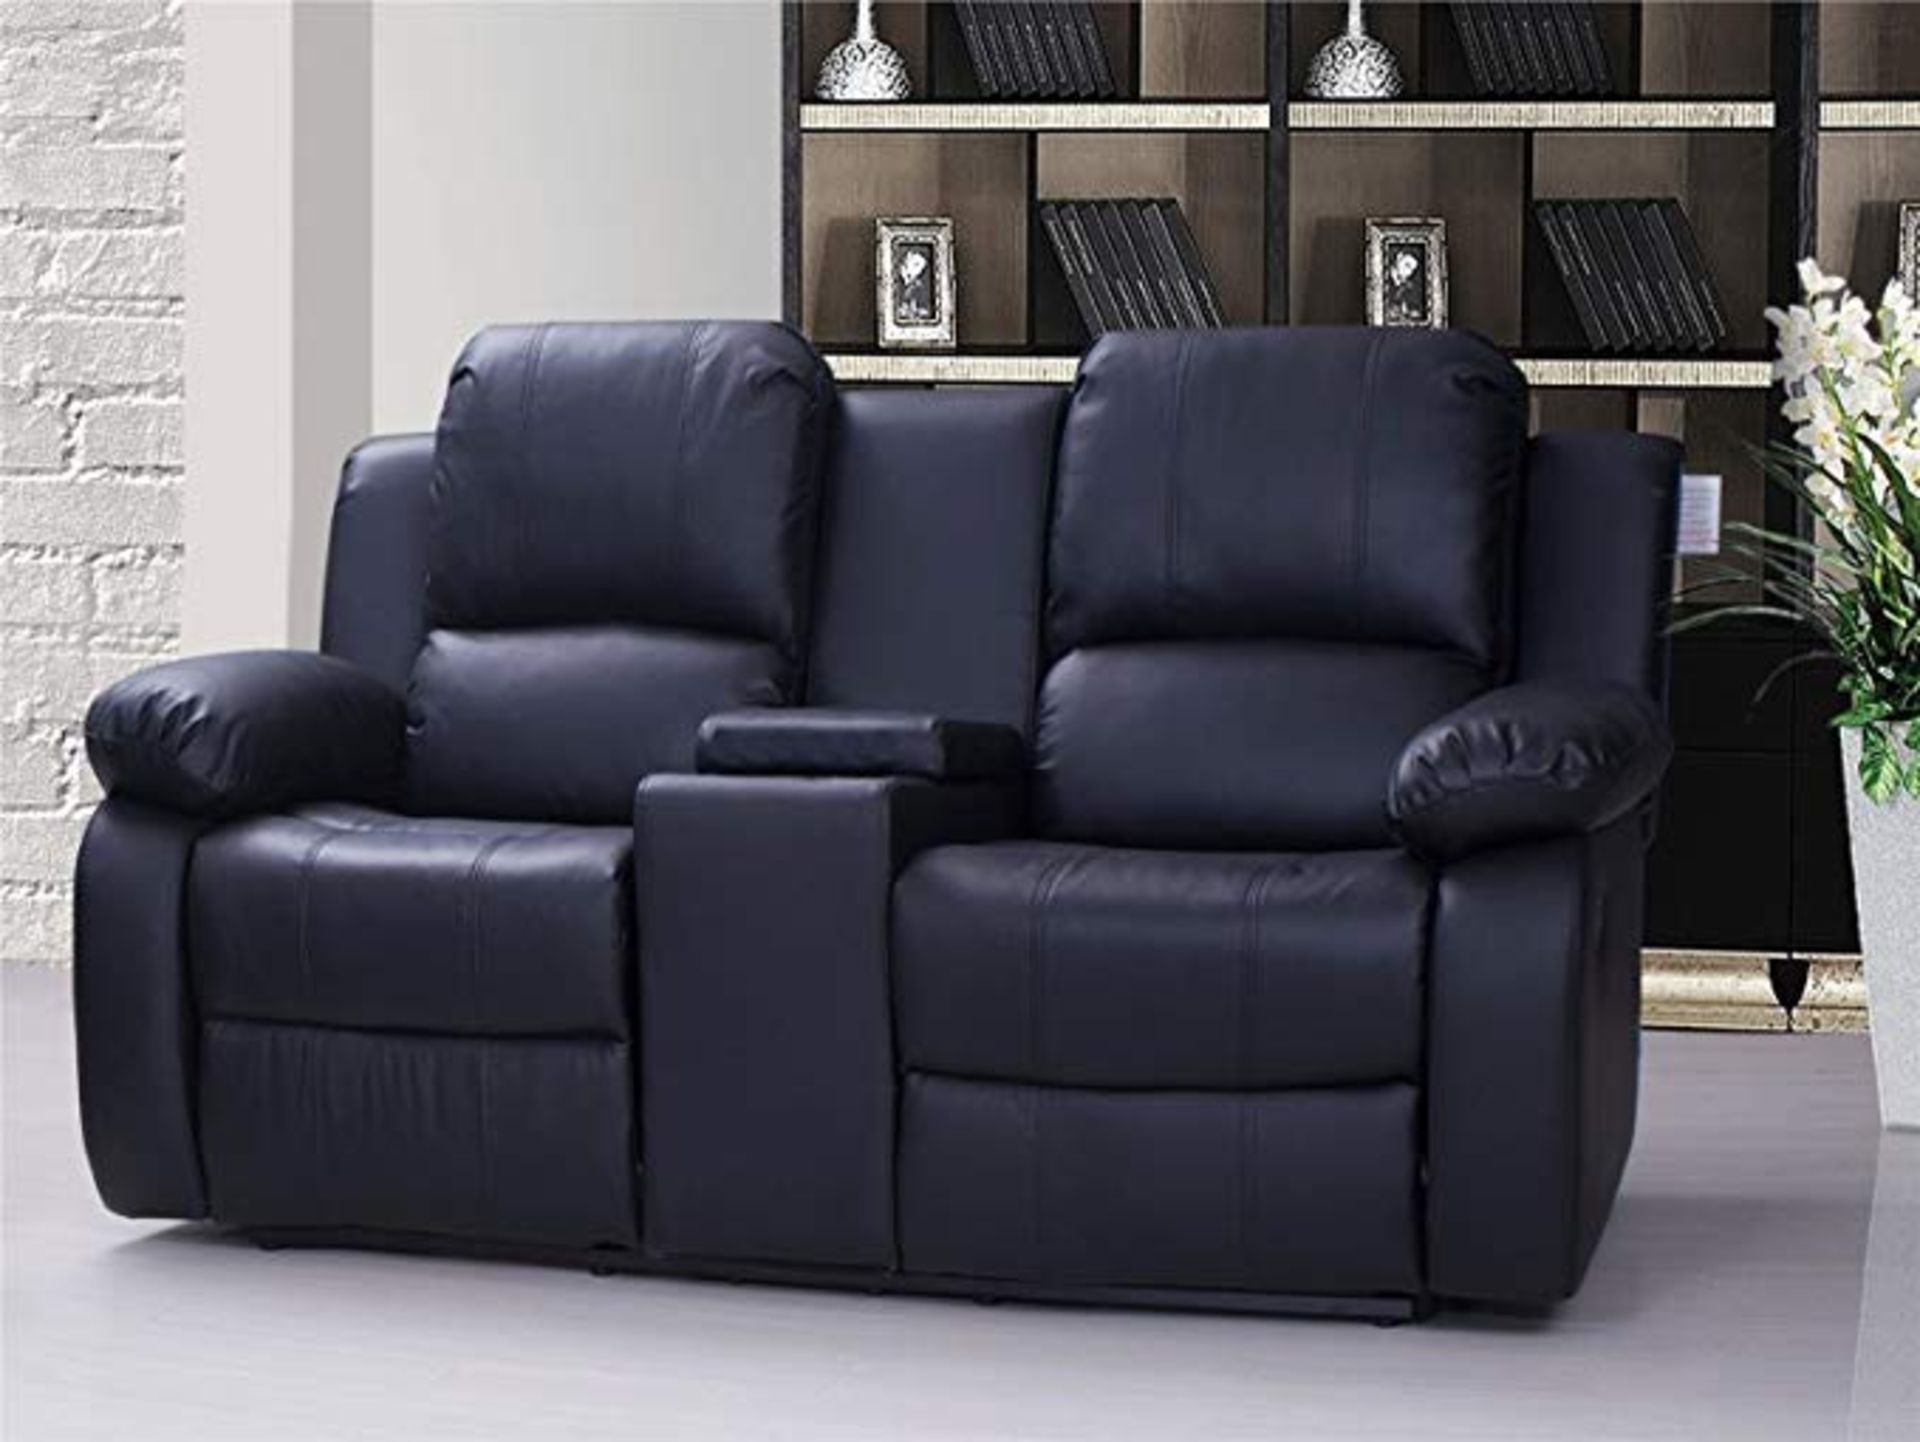 Brand New Boxed 2 Seater Supreme Black Leather Reclining Sofa With Drinks Holder And Console